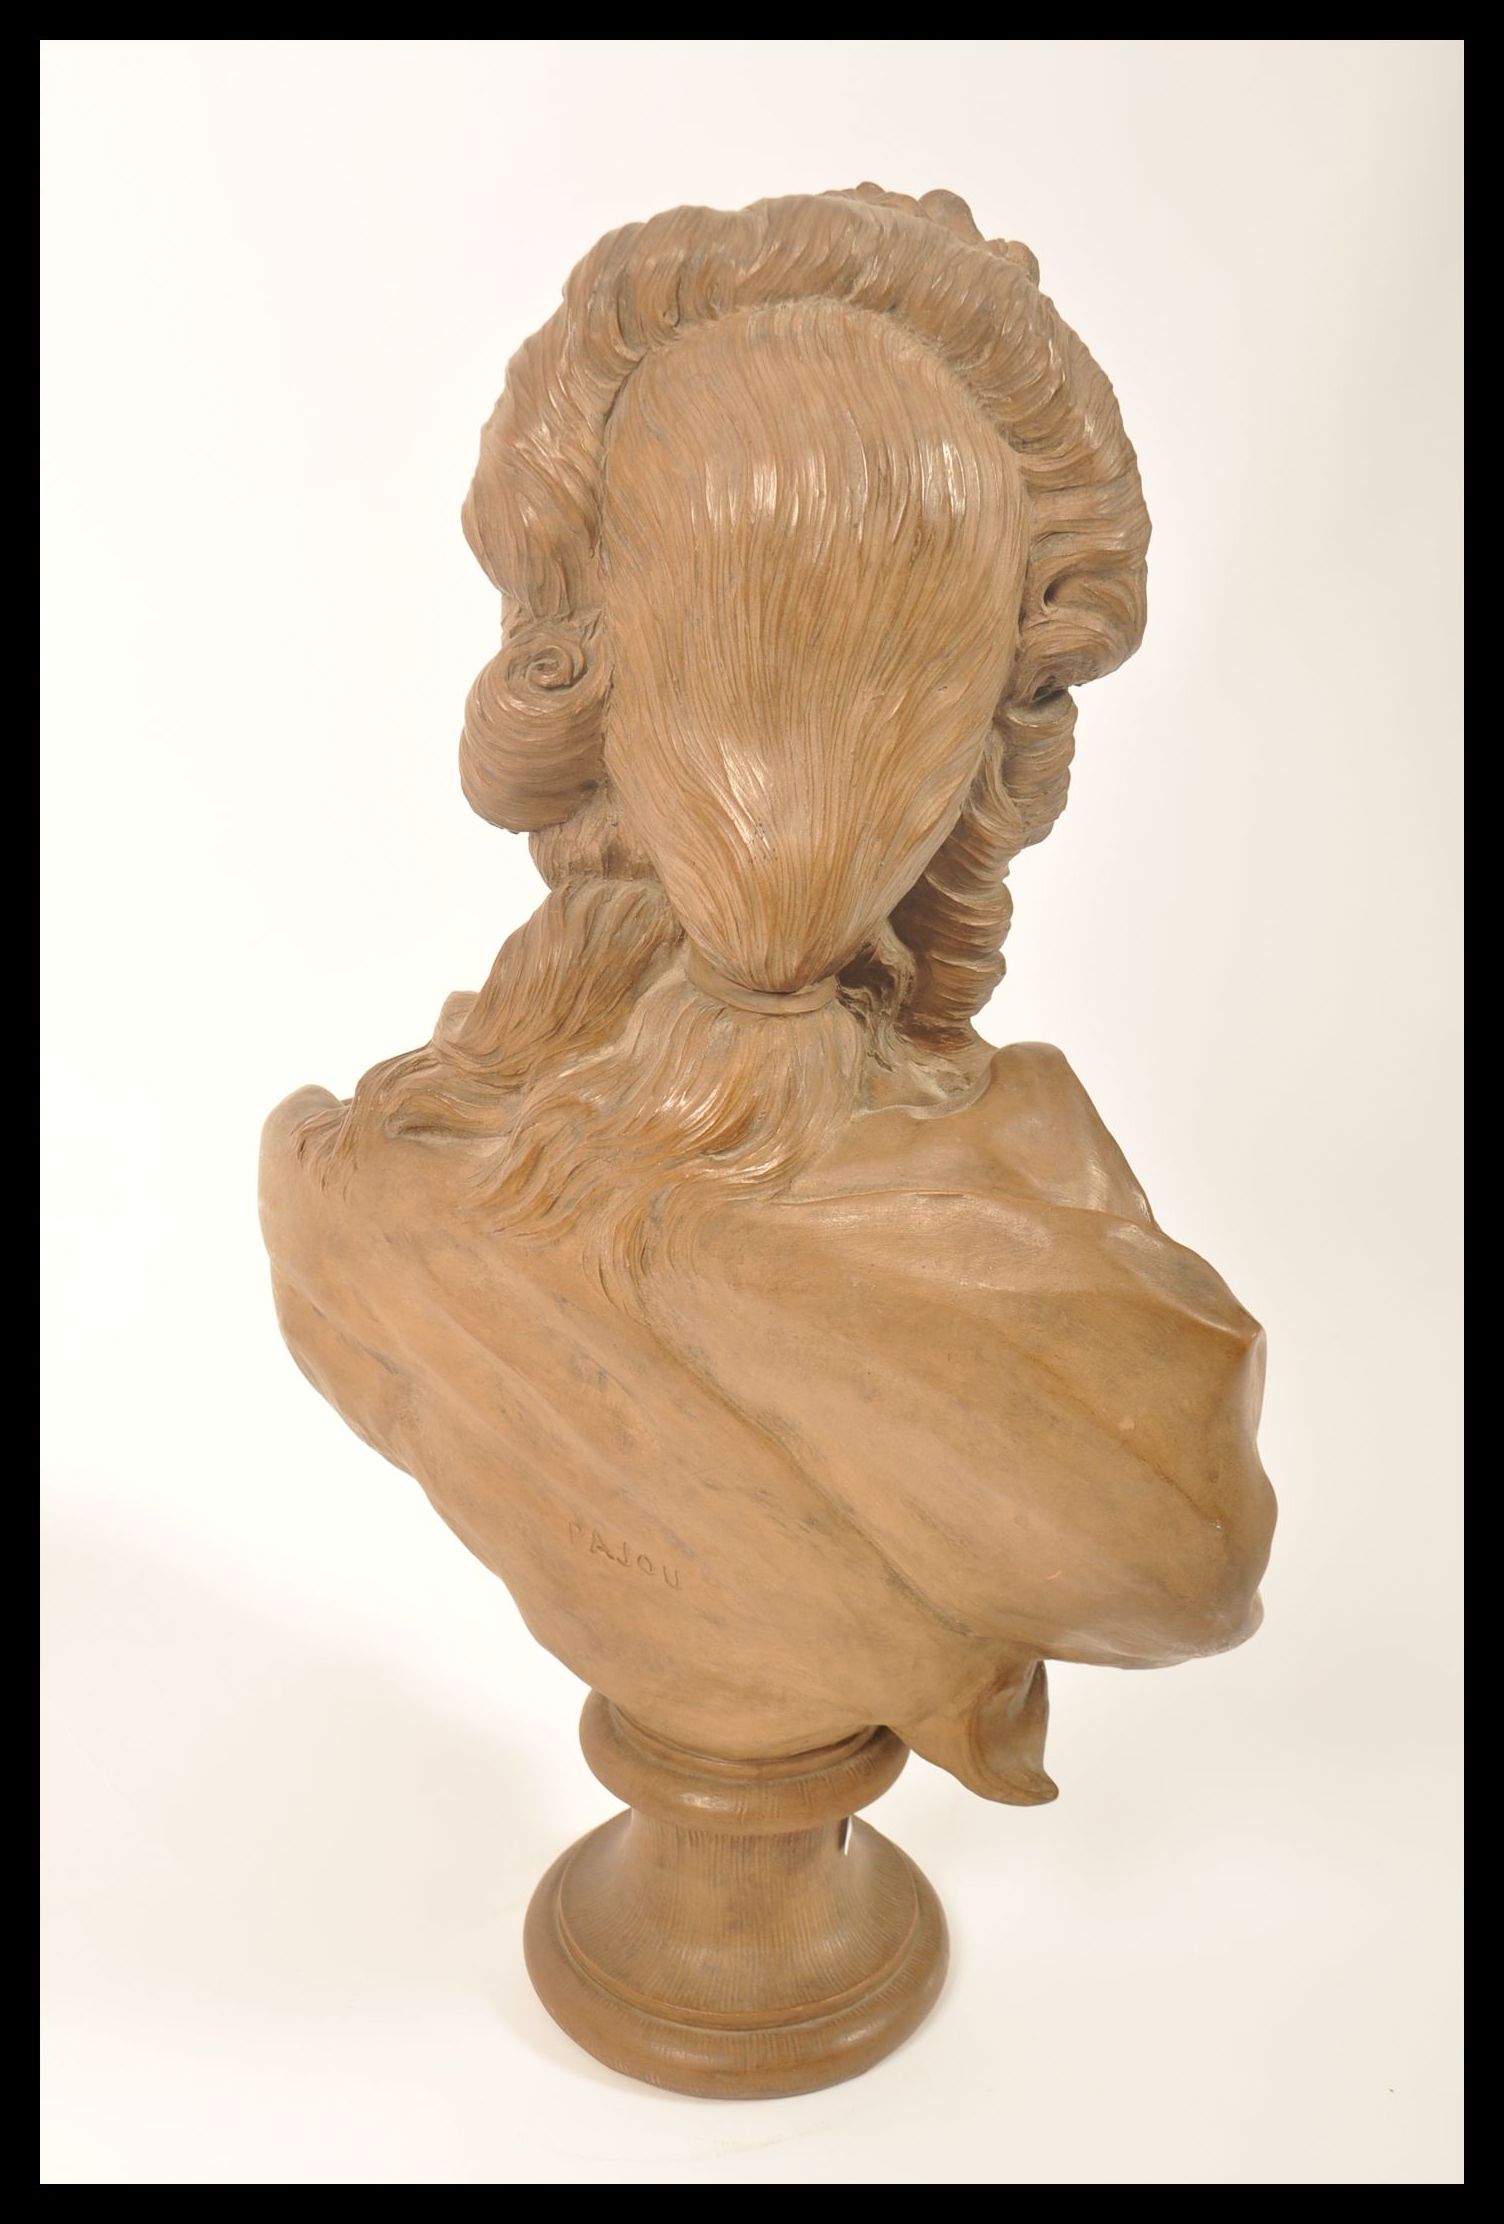 19TH CENTURY LARGE TERRACOTTA BUST AFTER AUGUSTIN PAJOU - Image 7 of 8